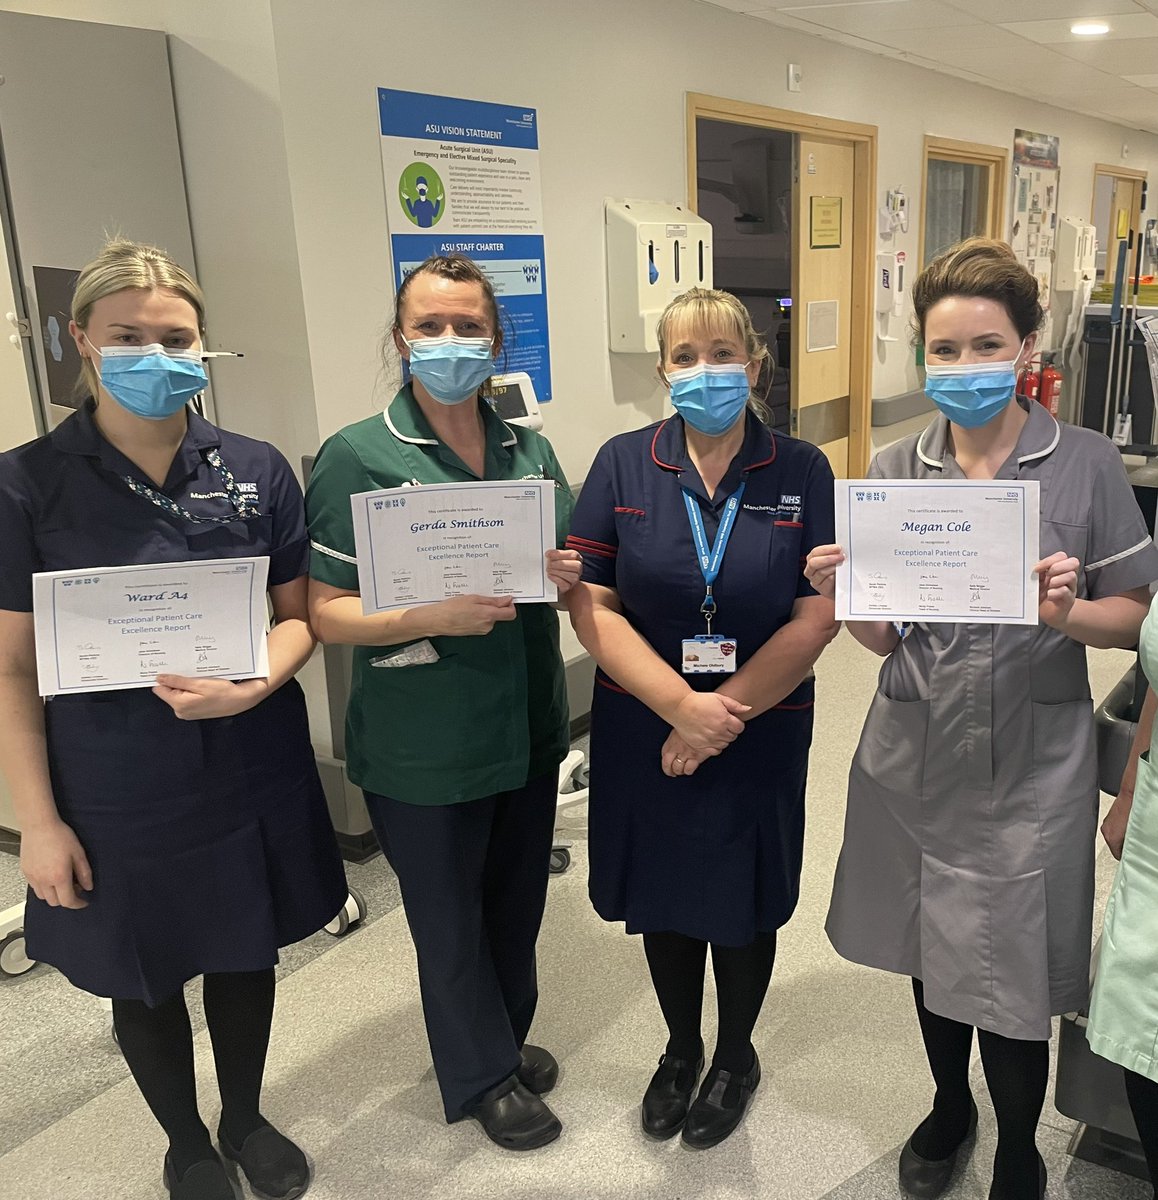 A massive thank you to @moldbury1 for presenting @MFT_WardA4 their excellence reports to the ward yesterday for our excellent team work on A4, and to both Gerda our fabulous assistant practitioner and Megan our remarkable patient flow for all the hard work they do! #greatteamwork